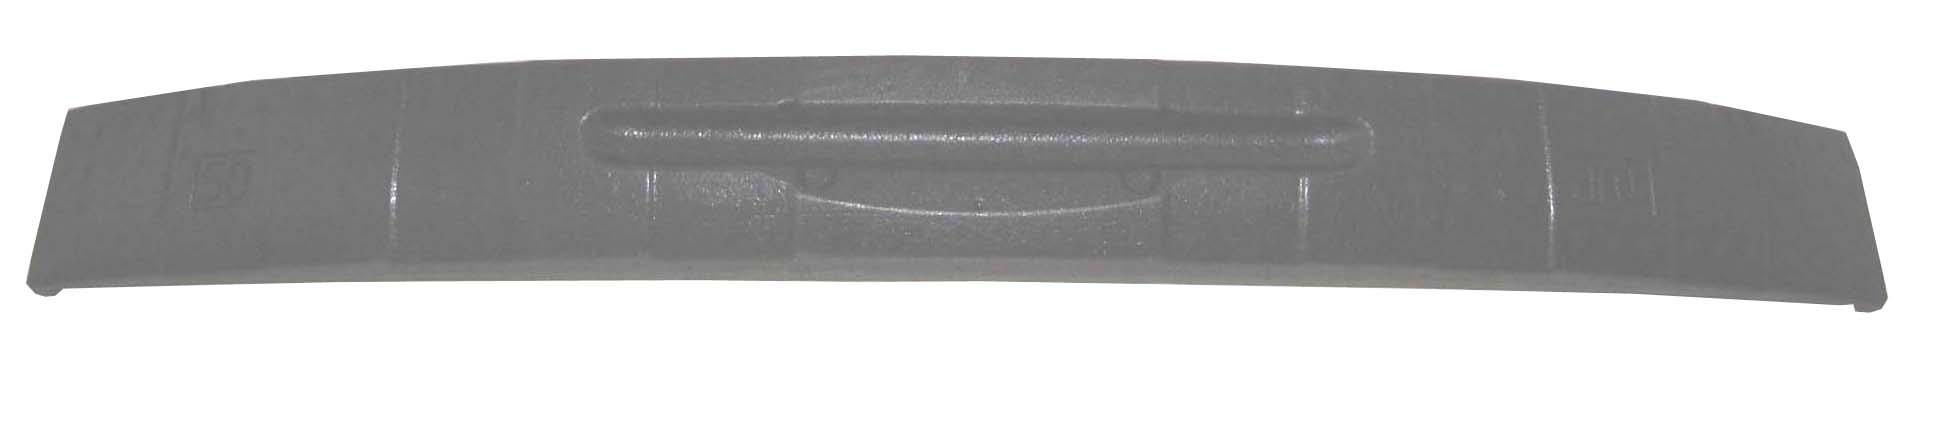 Aftermarket TOYOTA COROLLA ENERGY ABSORBERS 2009-2010 | TOYOTA OEM